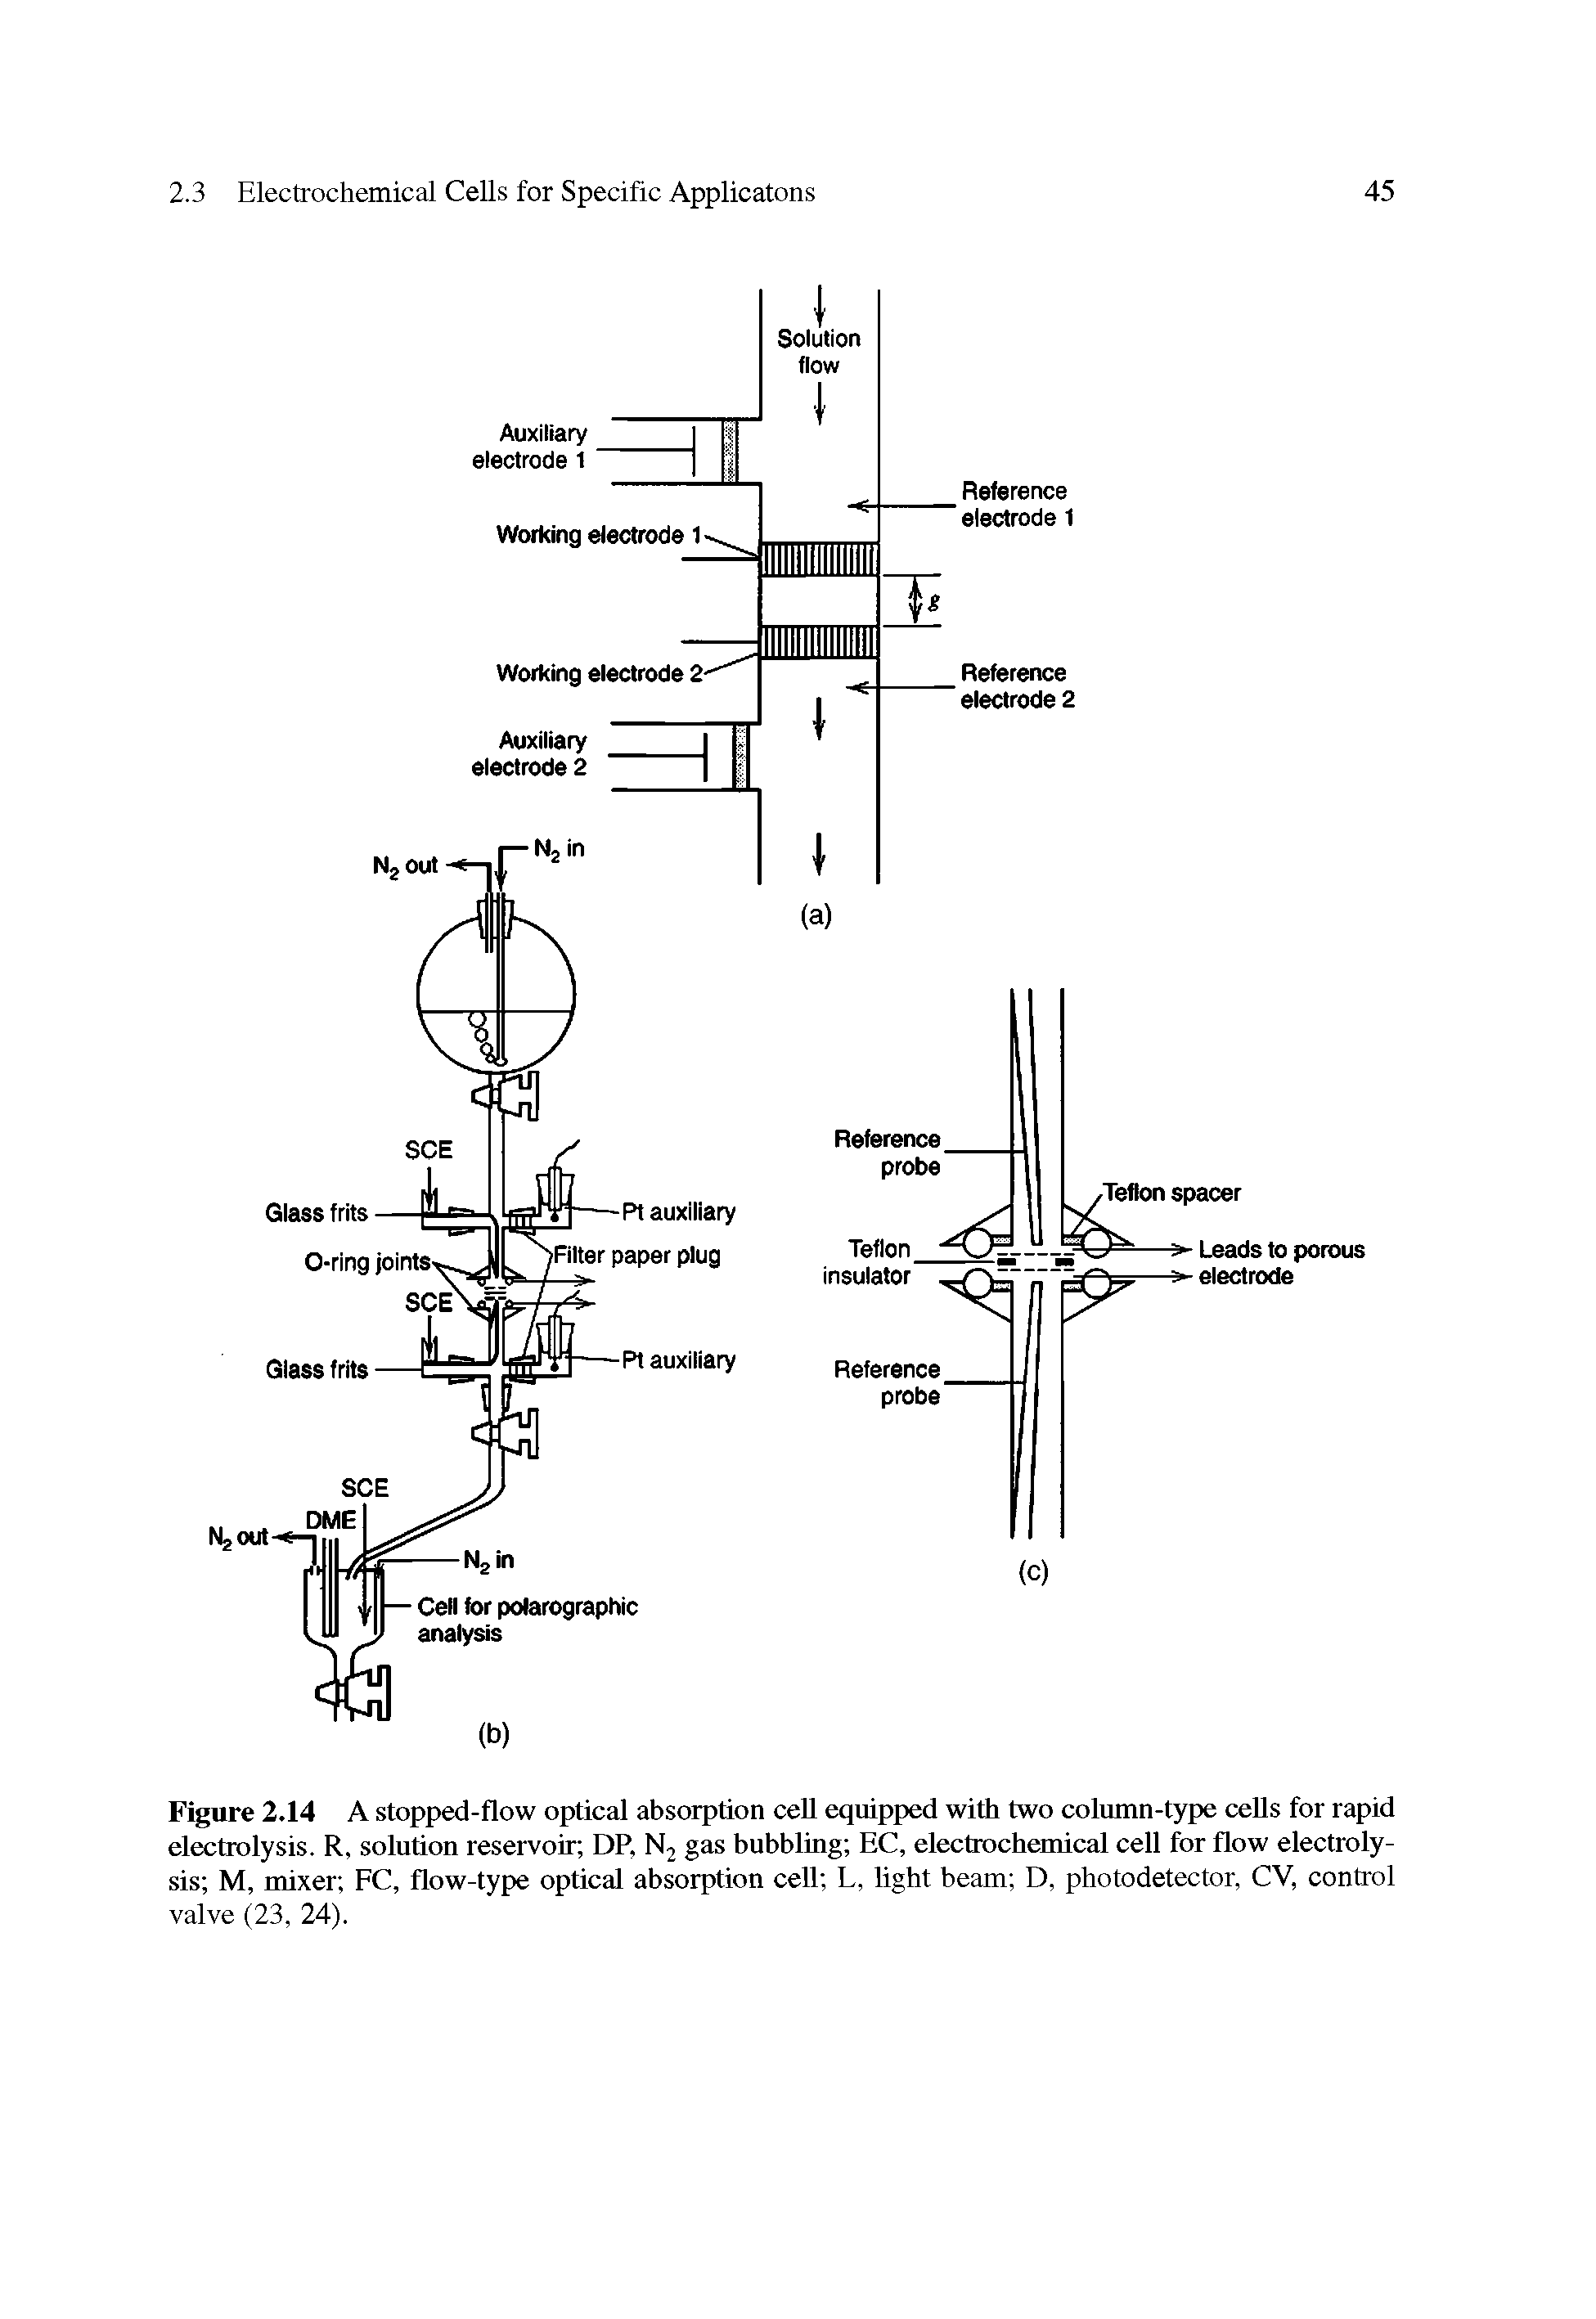 Figure 2.14 A stopped-flow optical absorption cell equipped with two column-type cells for rapid electrolysis. R, solution reservoir DP, Nj gas bubbling EC, electrochemical cell for flow electrolysis M, mixer FC, flow-type optical absorption cell L, light beam D, photodetector, CV, control valve (23, 24).